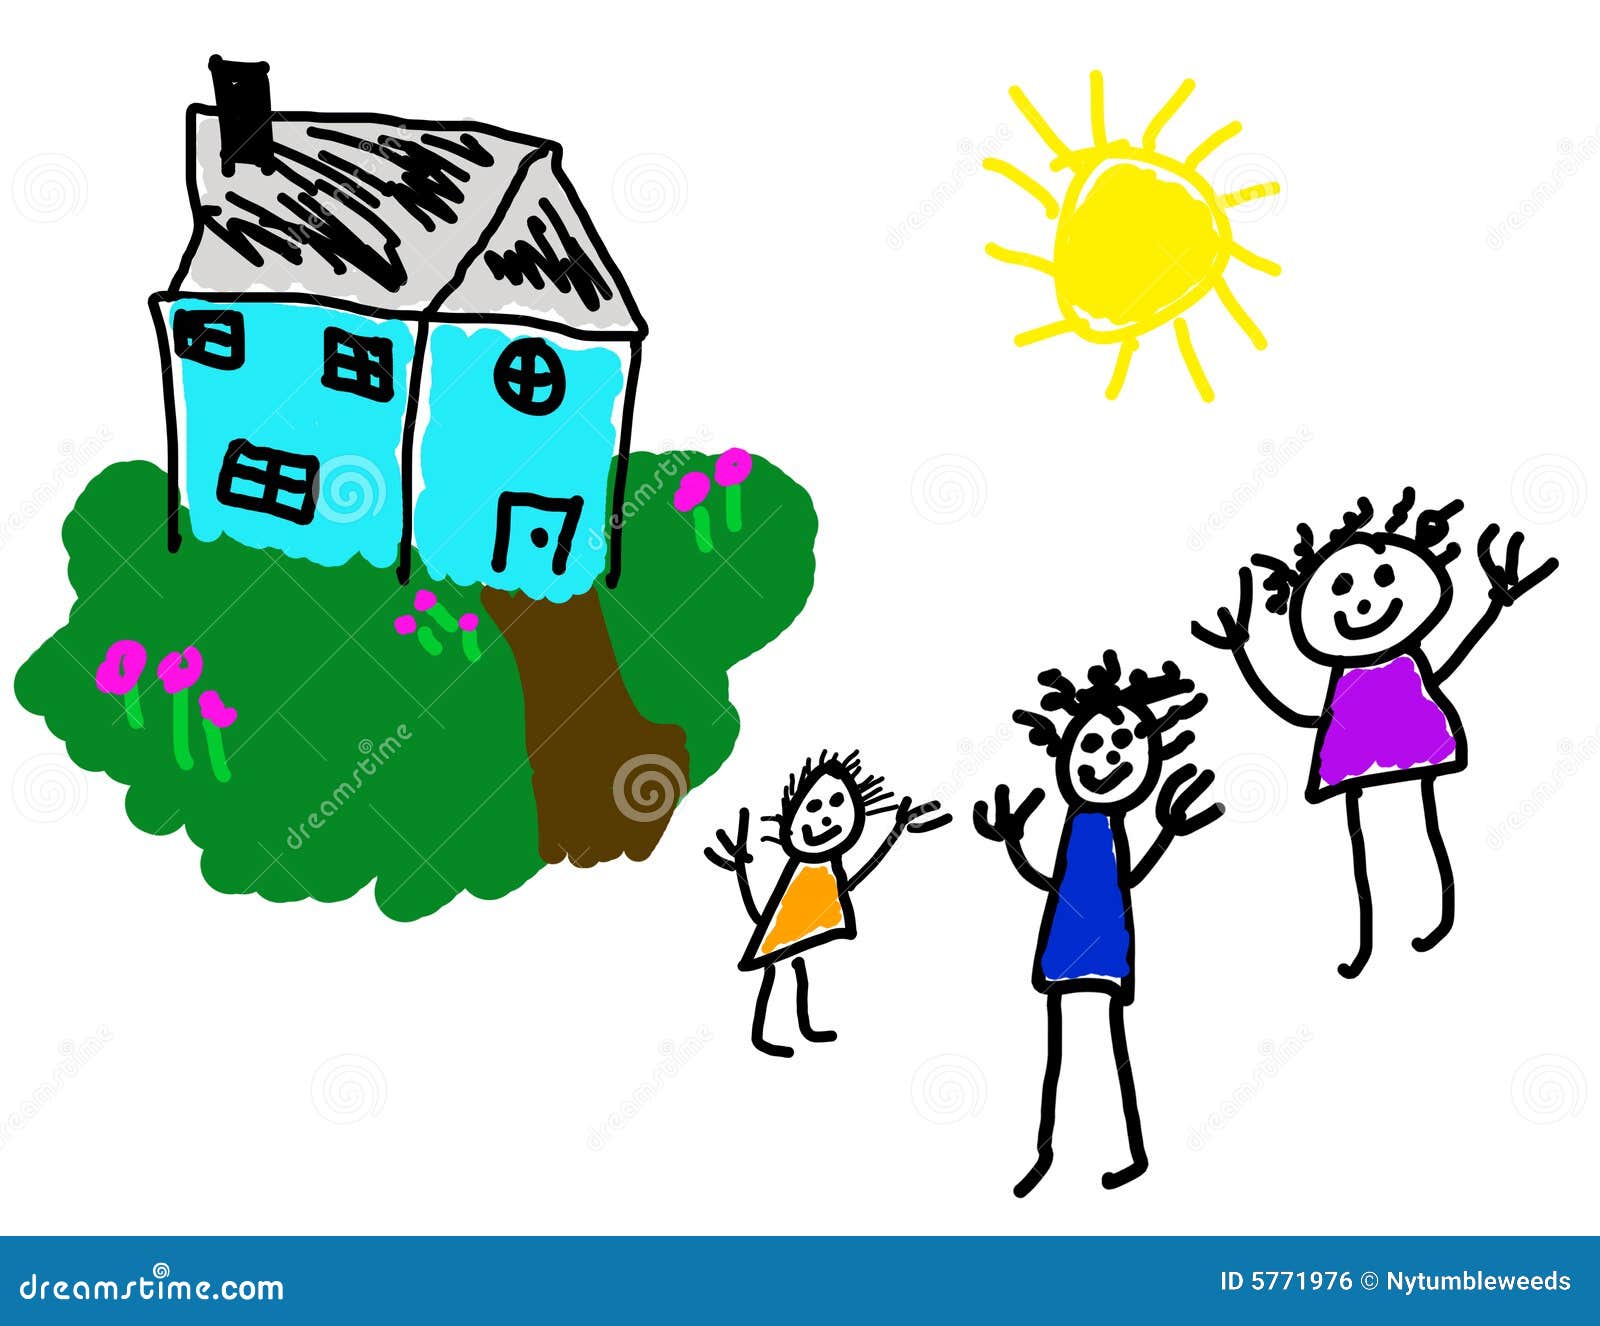 Child's Drawing Of Happy Home & Family Royalty Free Stock